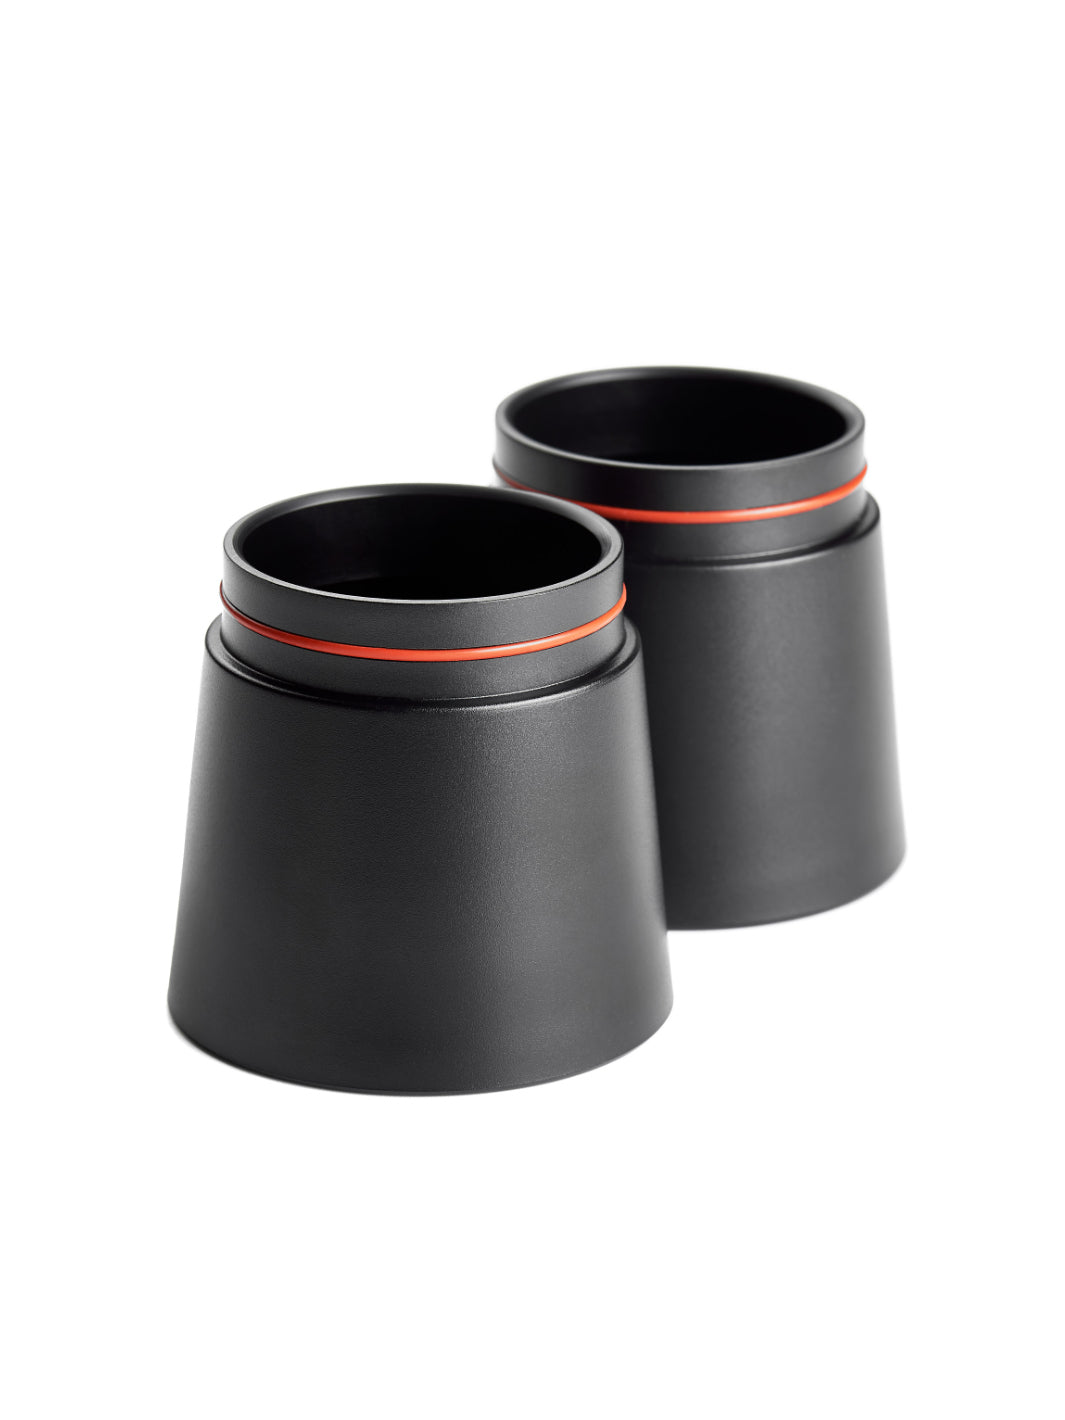 KINU ABS (o-ring) Catch Cups (set of 2)